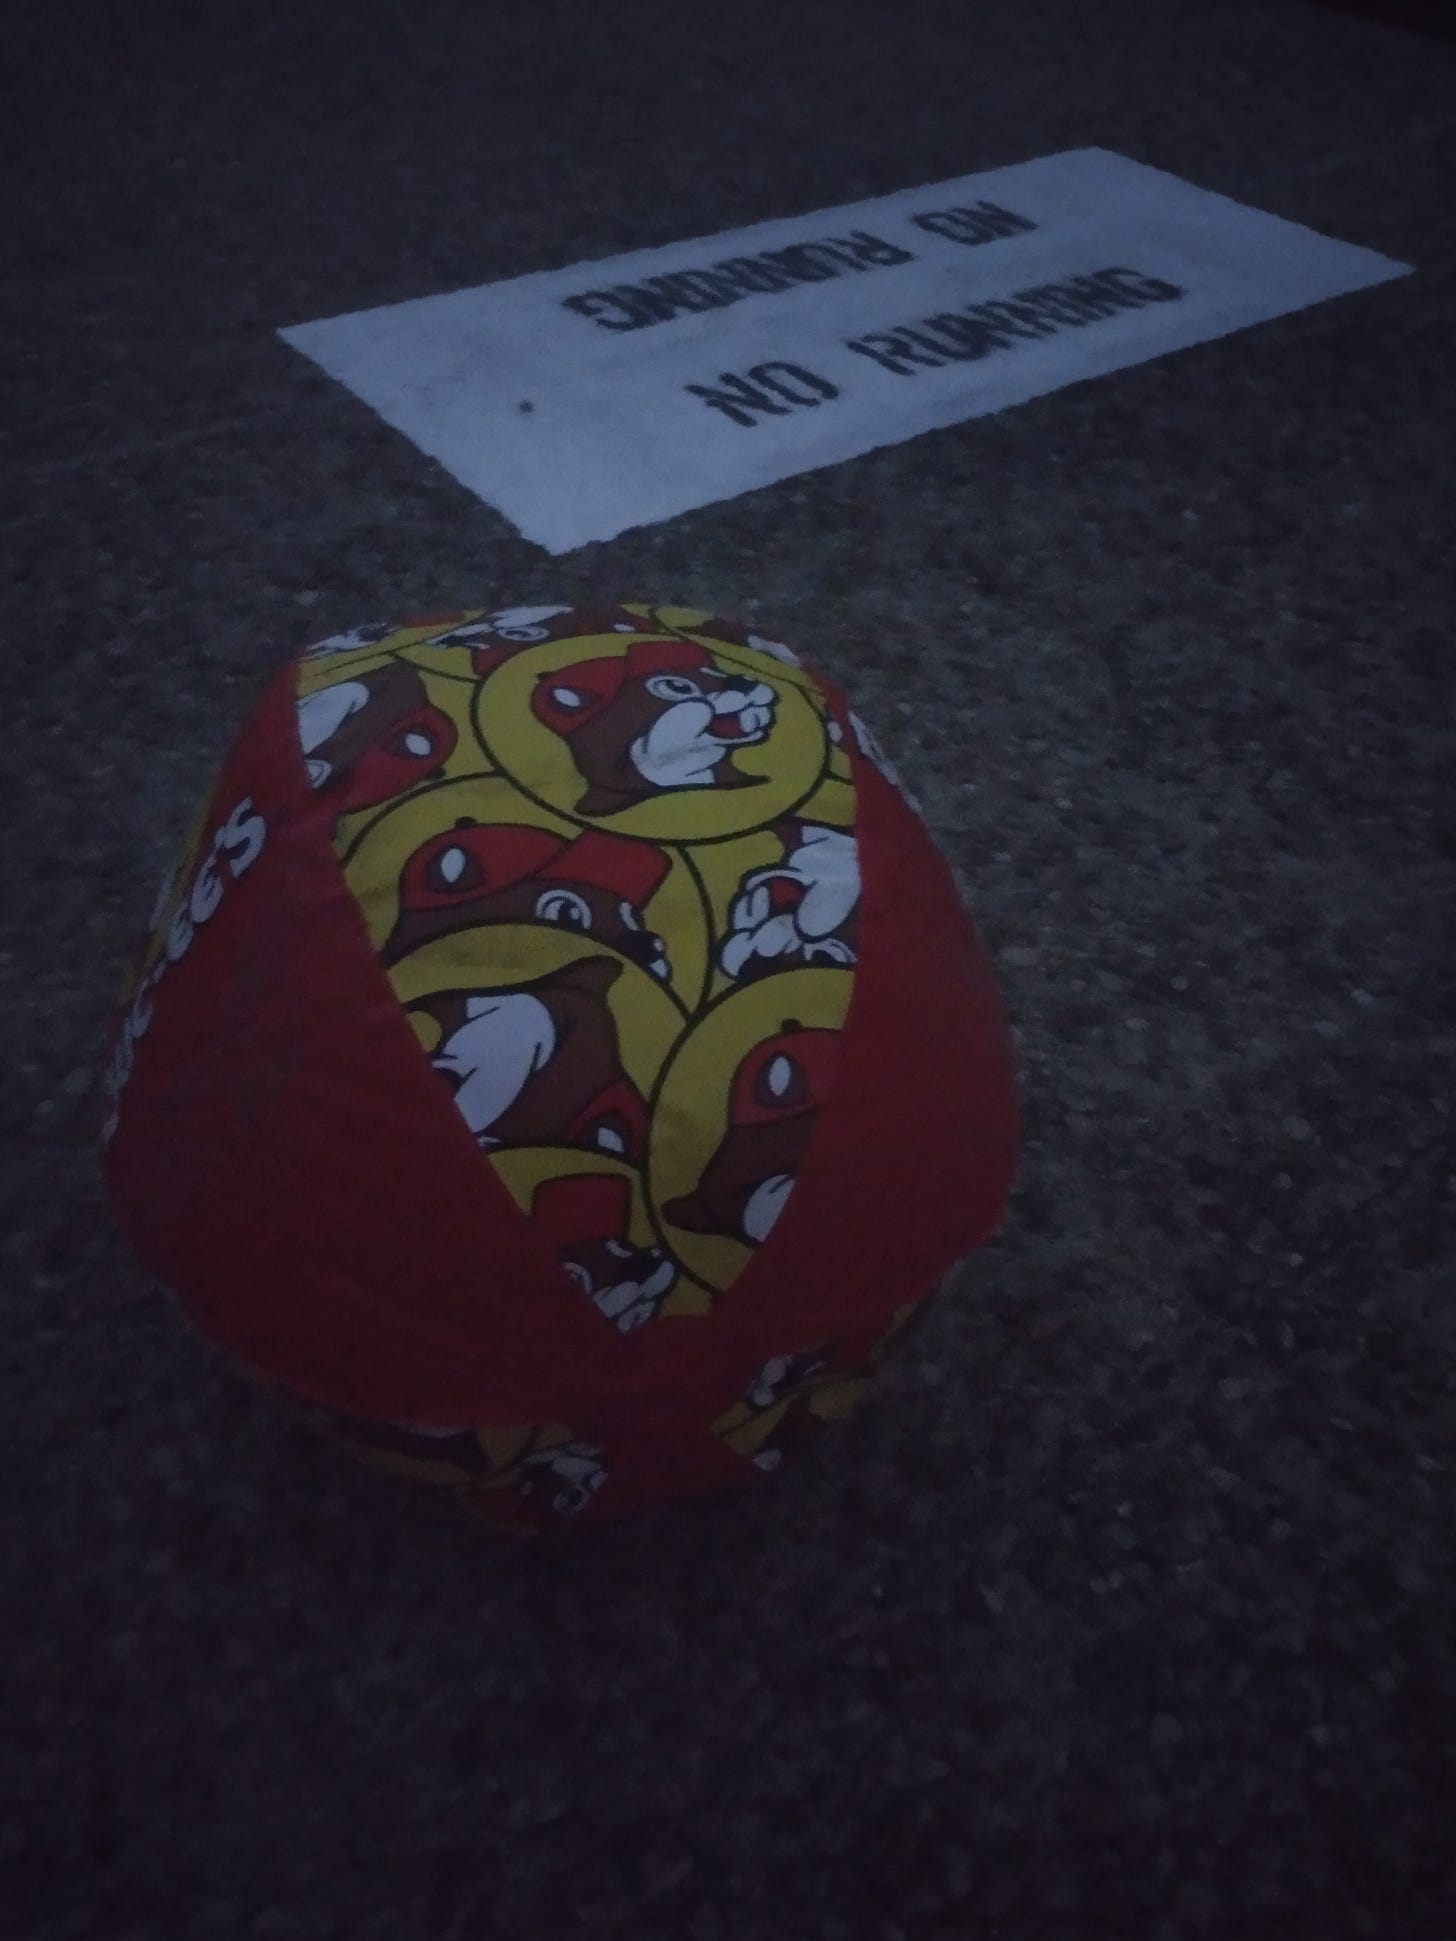 Blow up beach ball from Buc-ee's, with repeated pattern of a beaver wearing a baseball cap